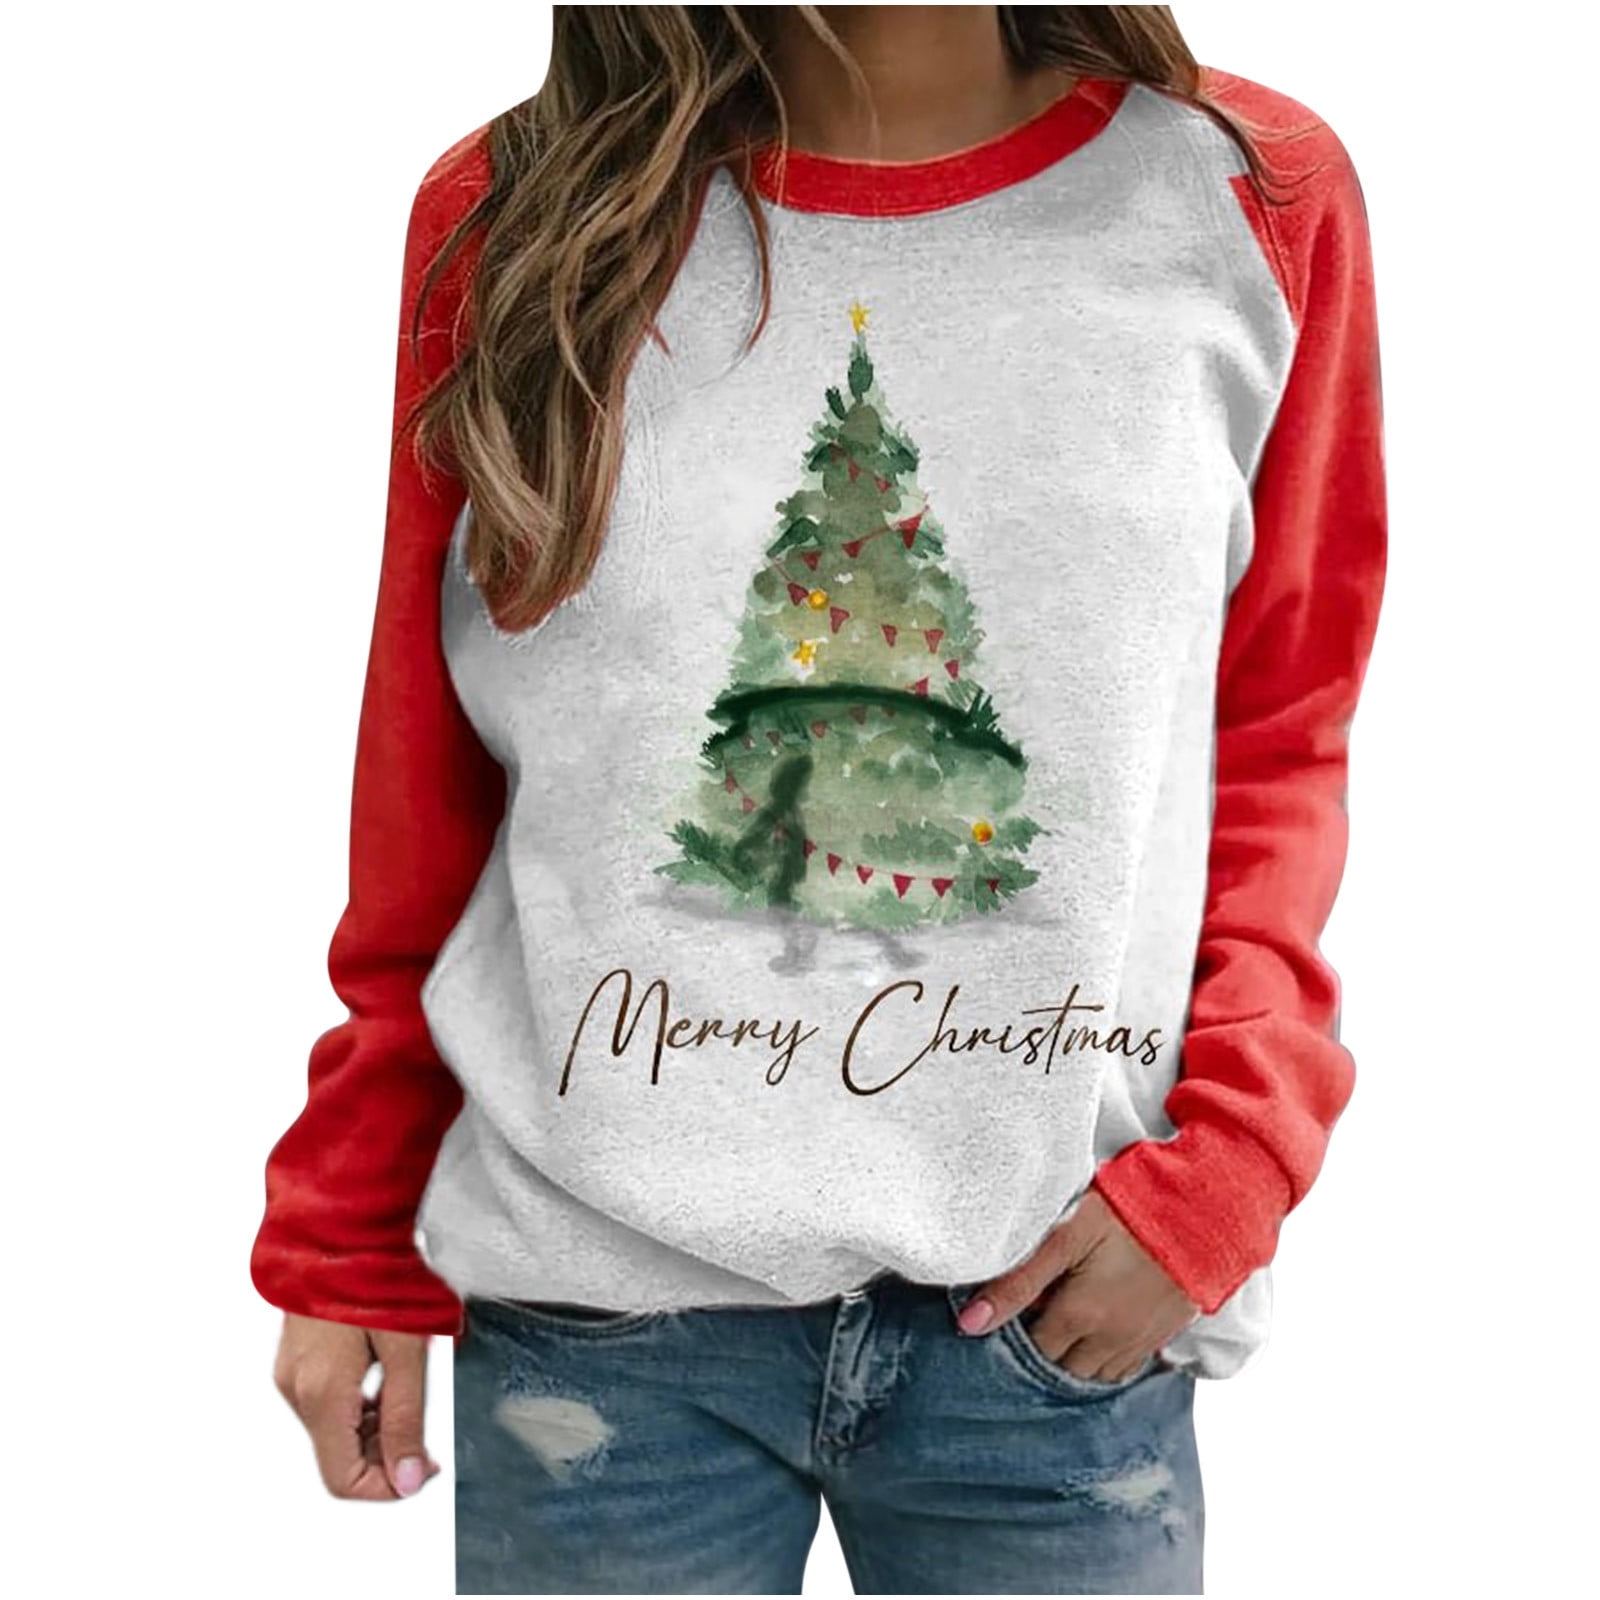 deals of the day lightning deals clearance Christmas Shirts for Women  Novelty Funny Graphic Lightweight Sweatshirt Xmas Tree Holiday Cute Tee  Pink